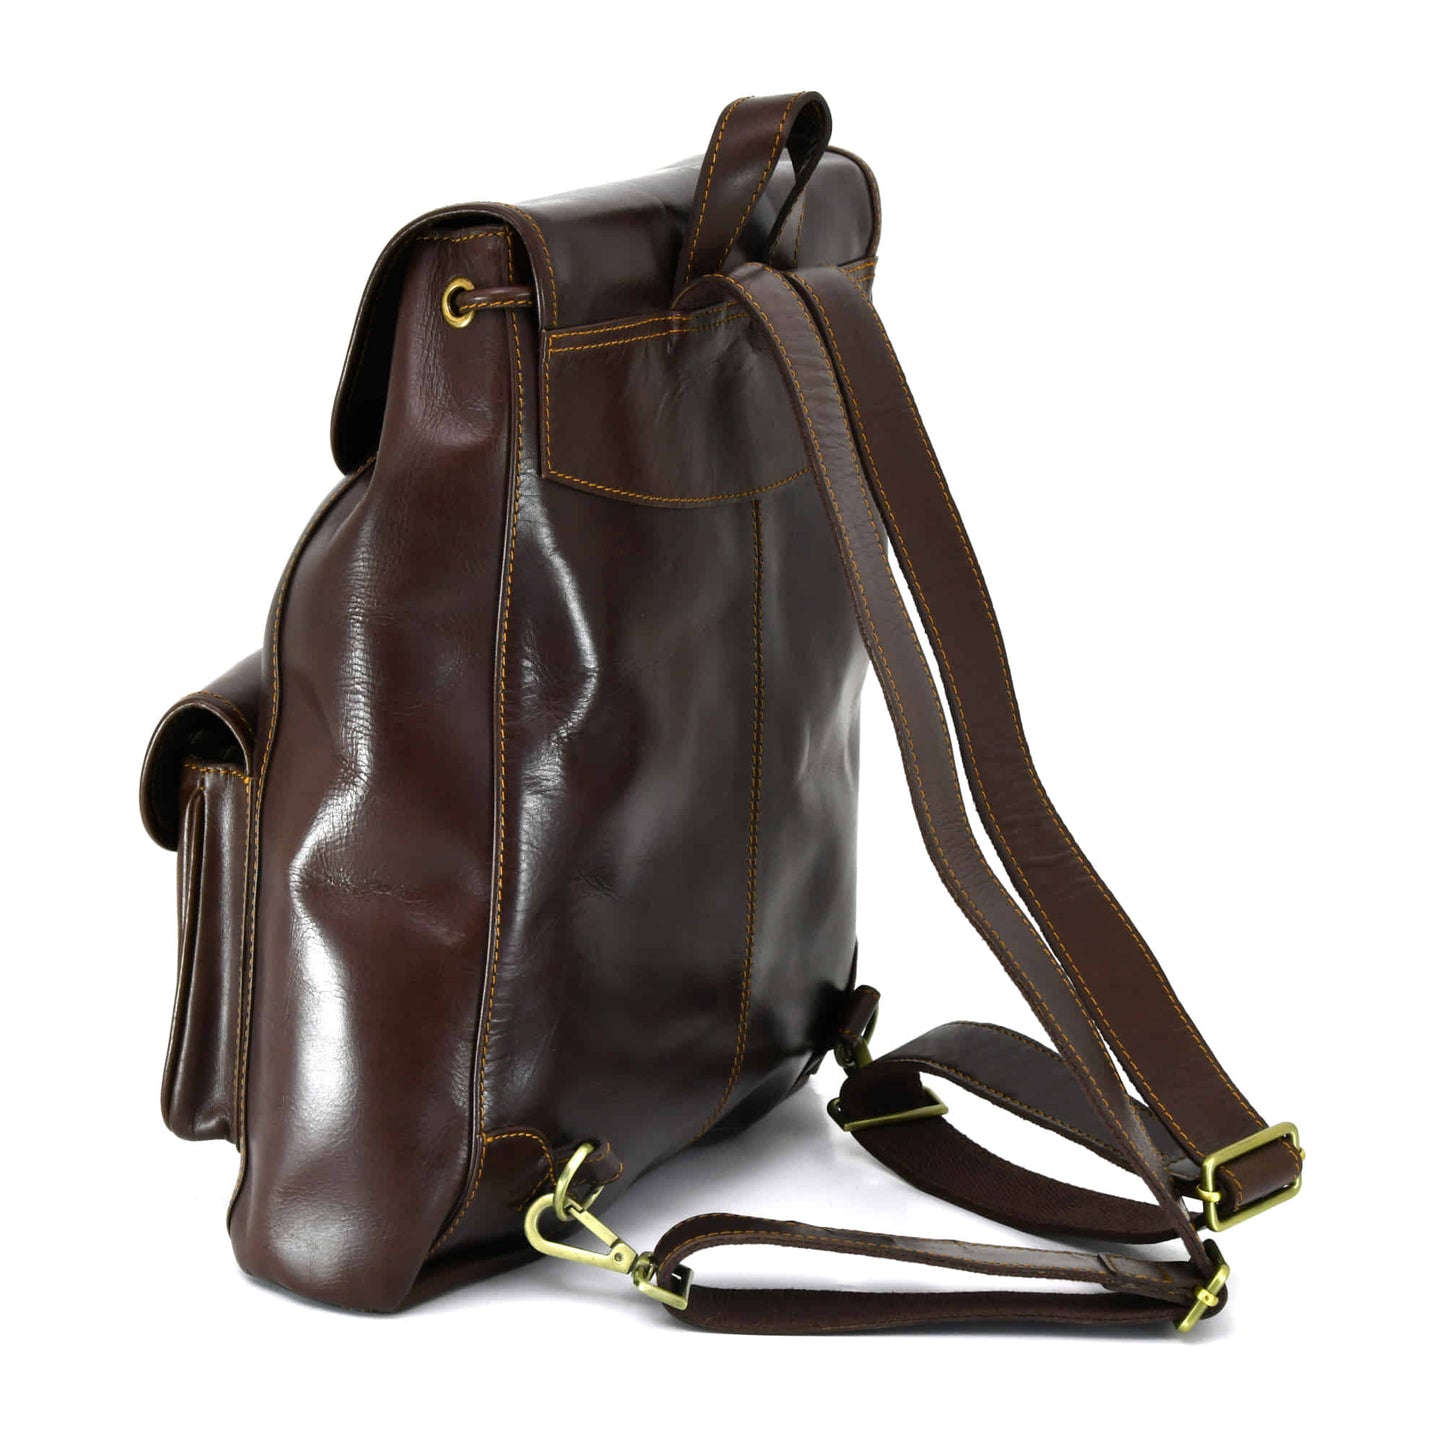 Style n Craft 392151 Backpack in Full Grain Dark Brown Leather, Medium Size - Back Angled View Showing the Adjustable Shoulder Straps & the Leather Hand Carry Strap